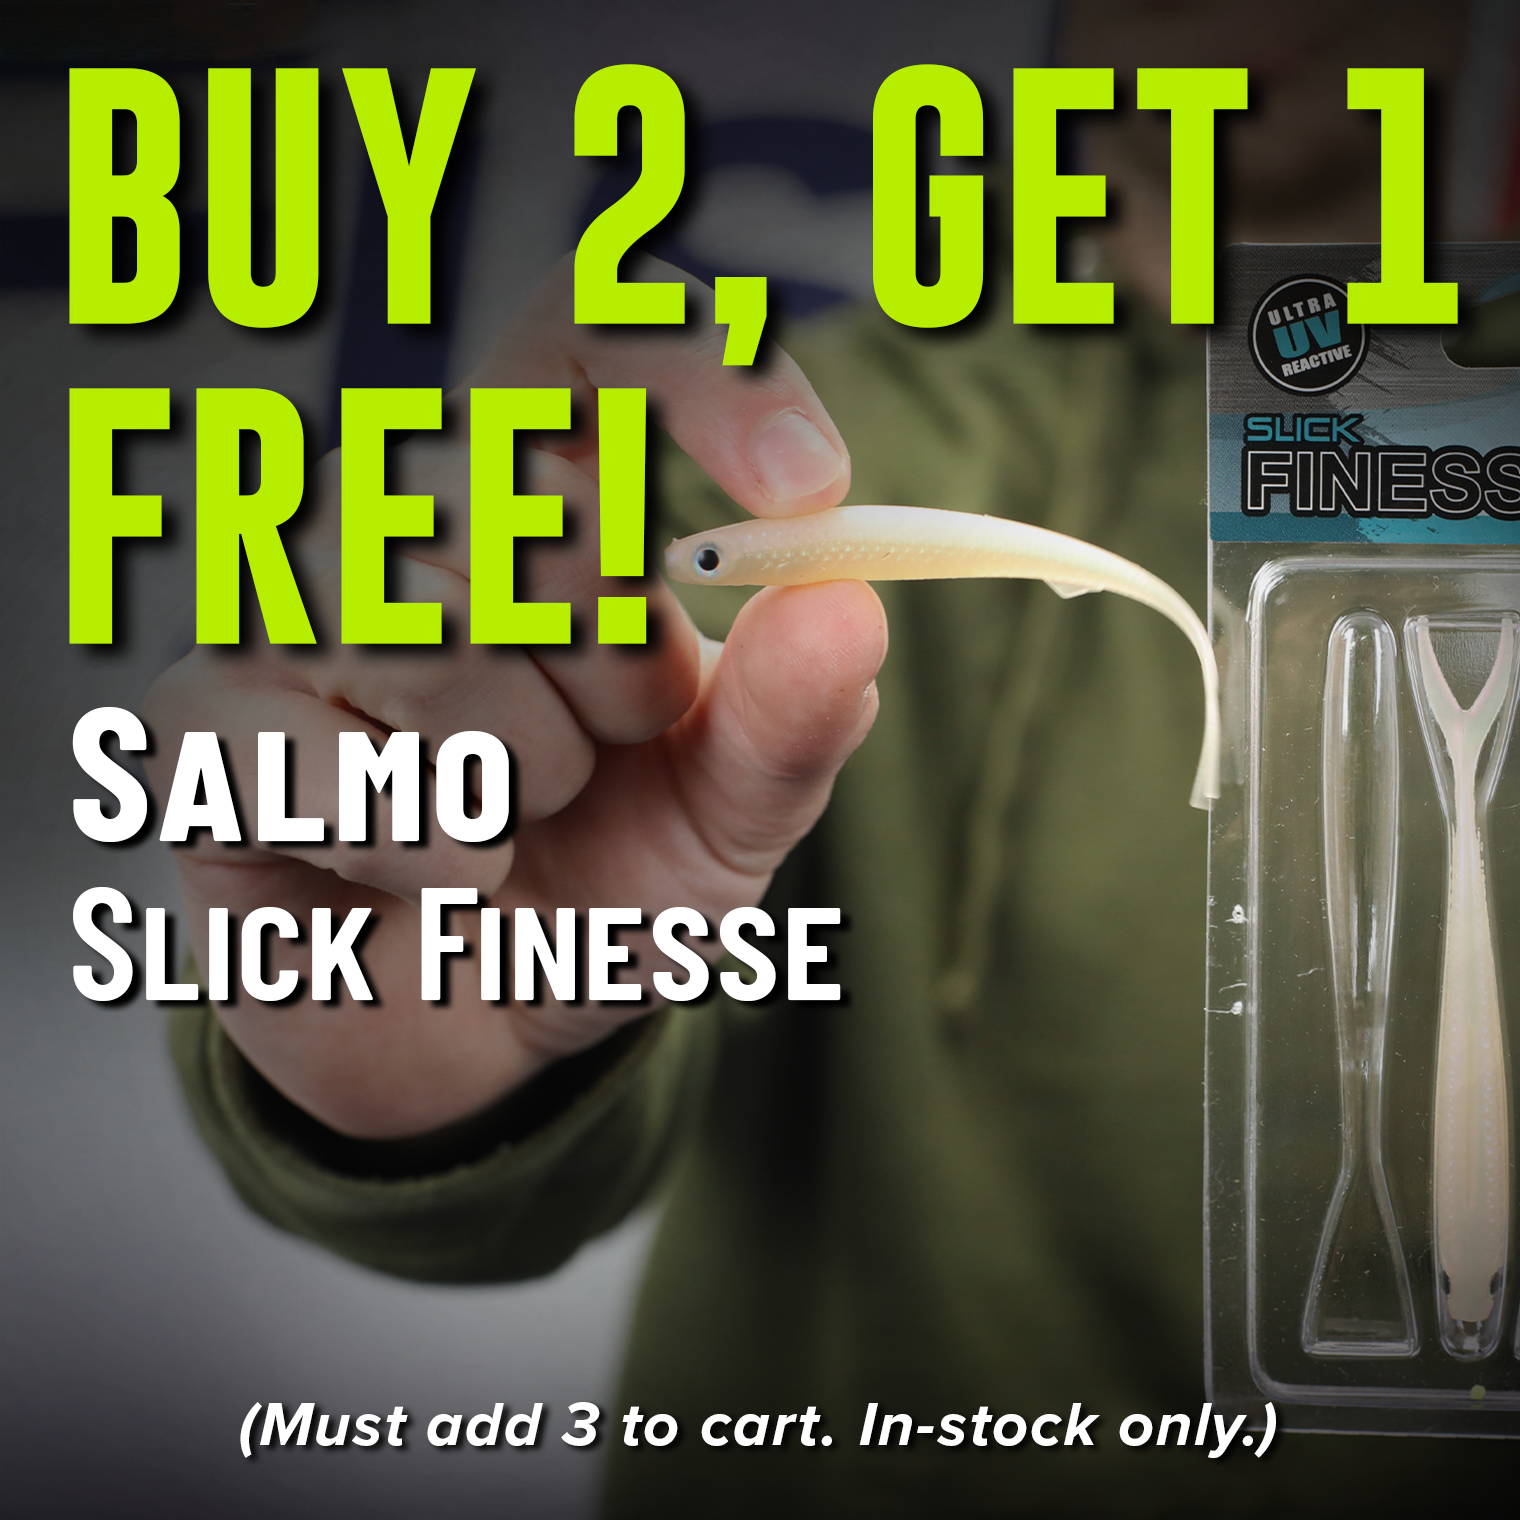 Buy 2, Get 1 Free! Salmo Slick Finesse (Must add 3 to cart. In-stock only.)